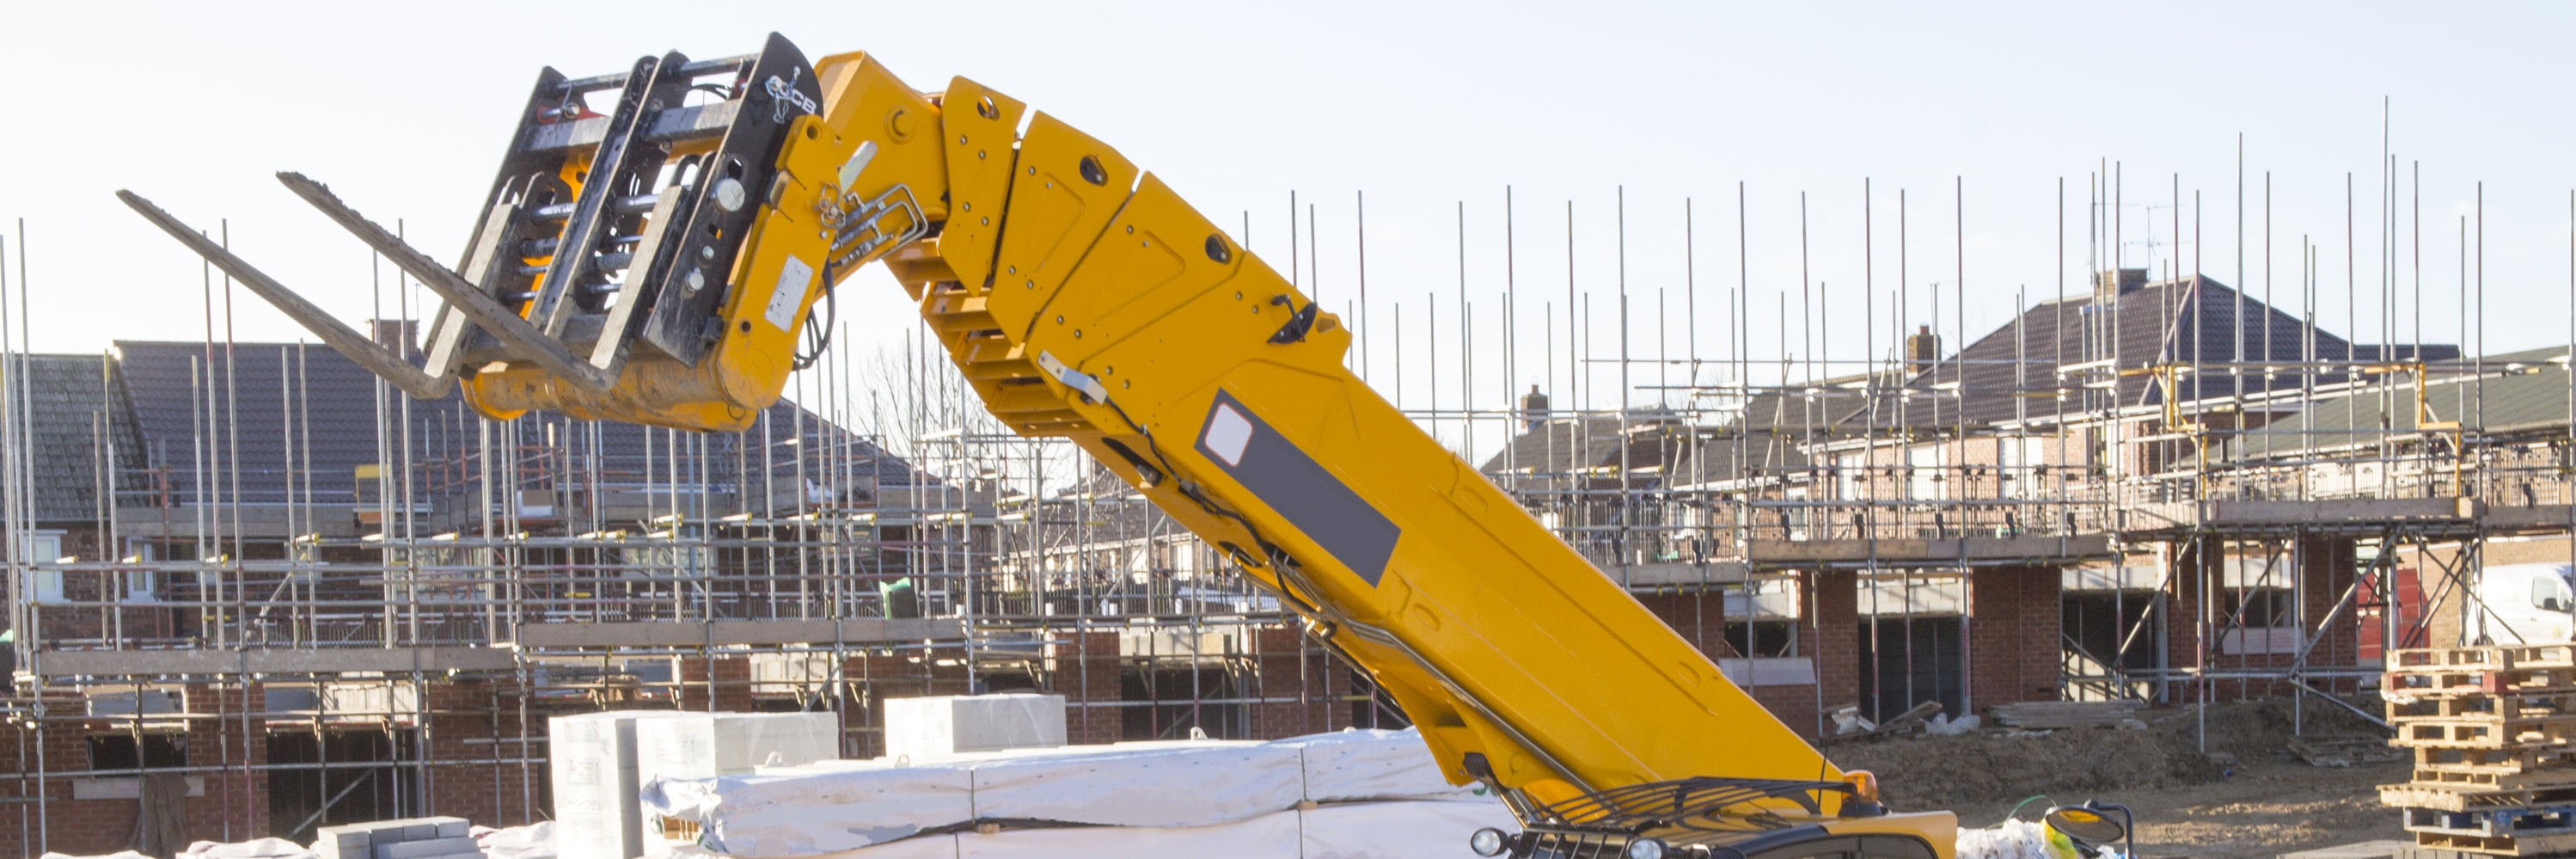 HSB Construction Insurance | Annual Construction Projects